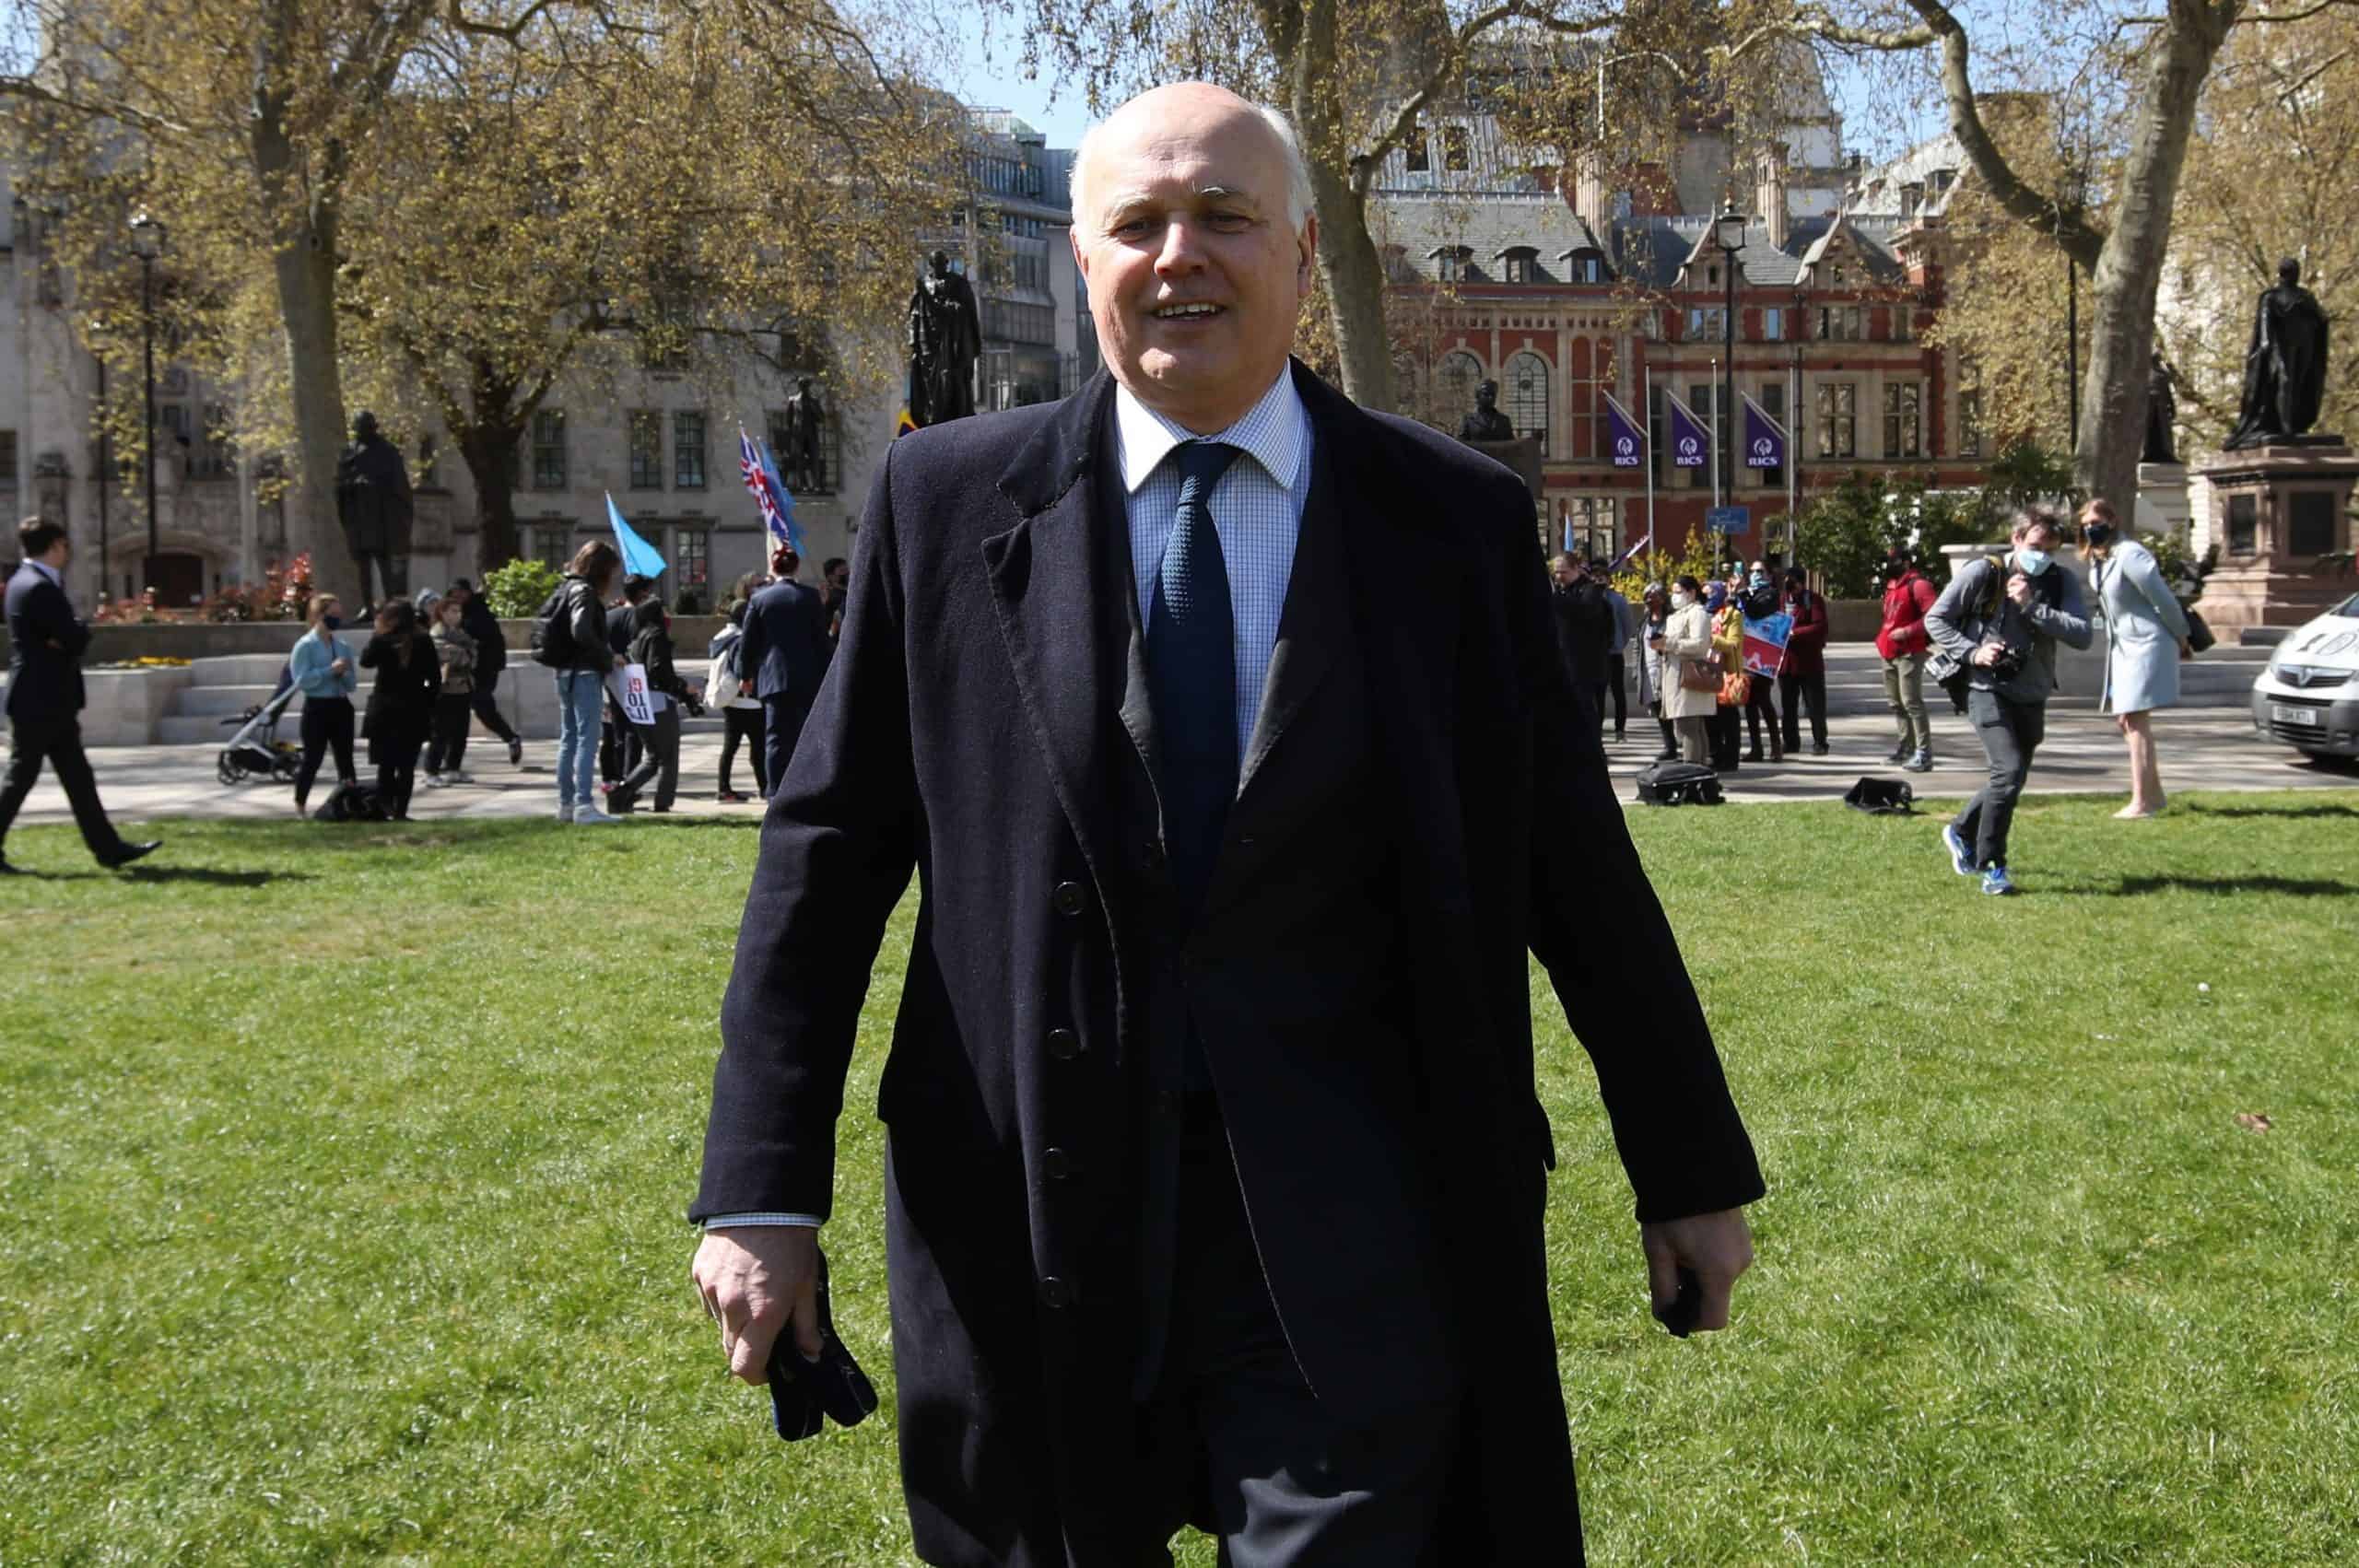 Iain Duncan Smith said people still went to office during WW II and was lampooned online